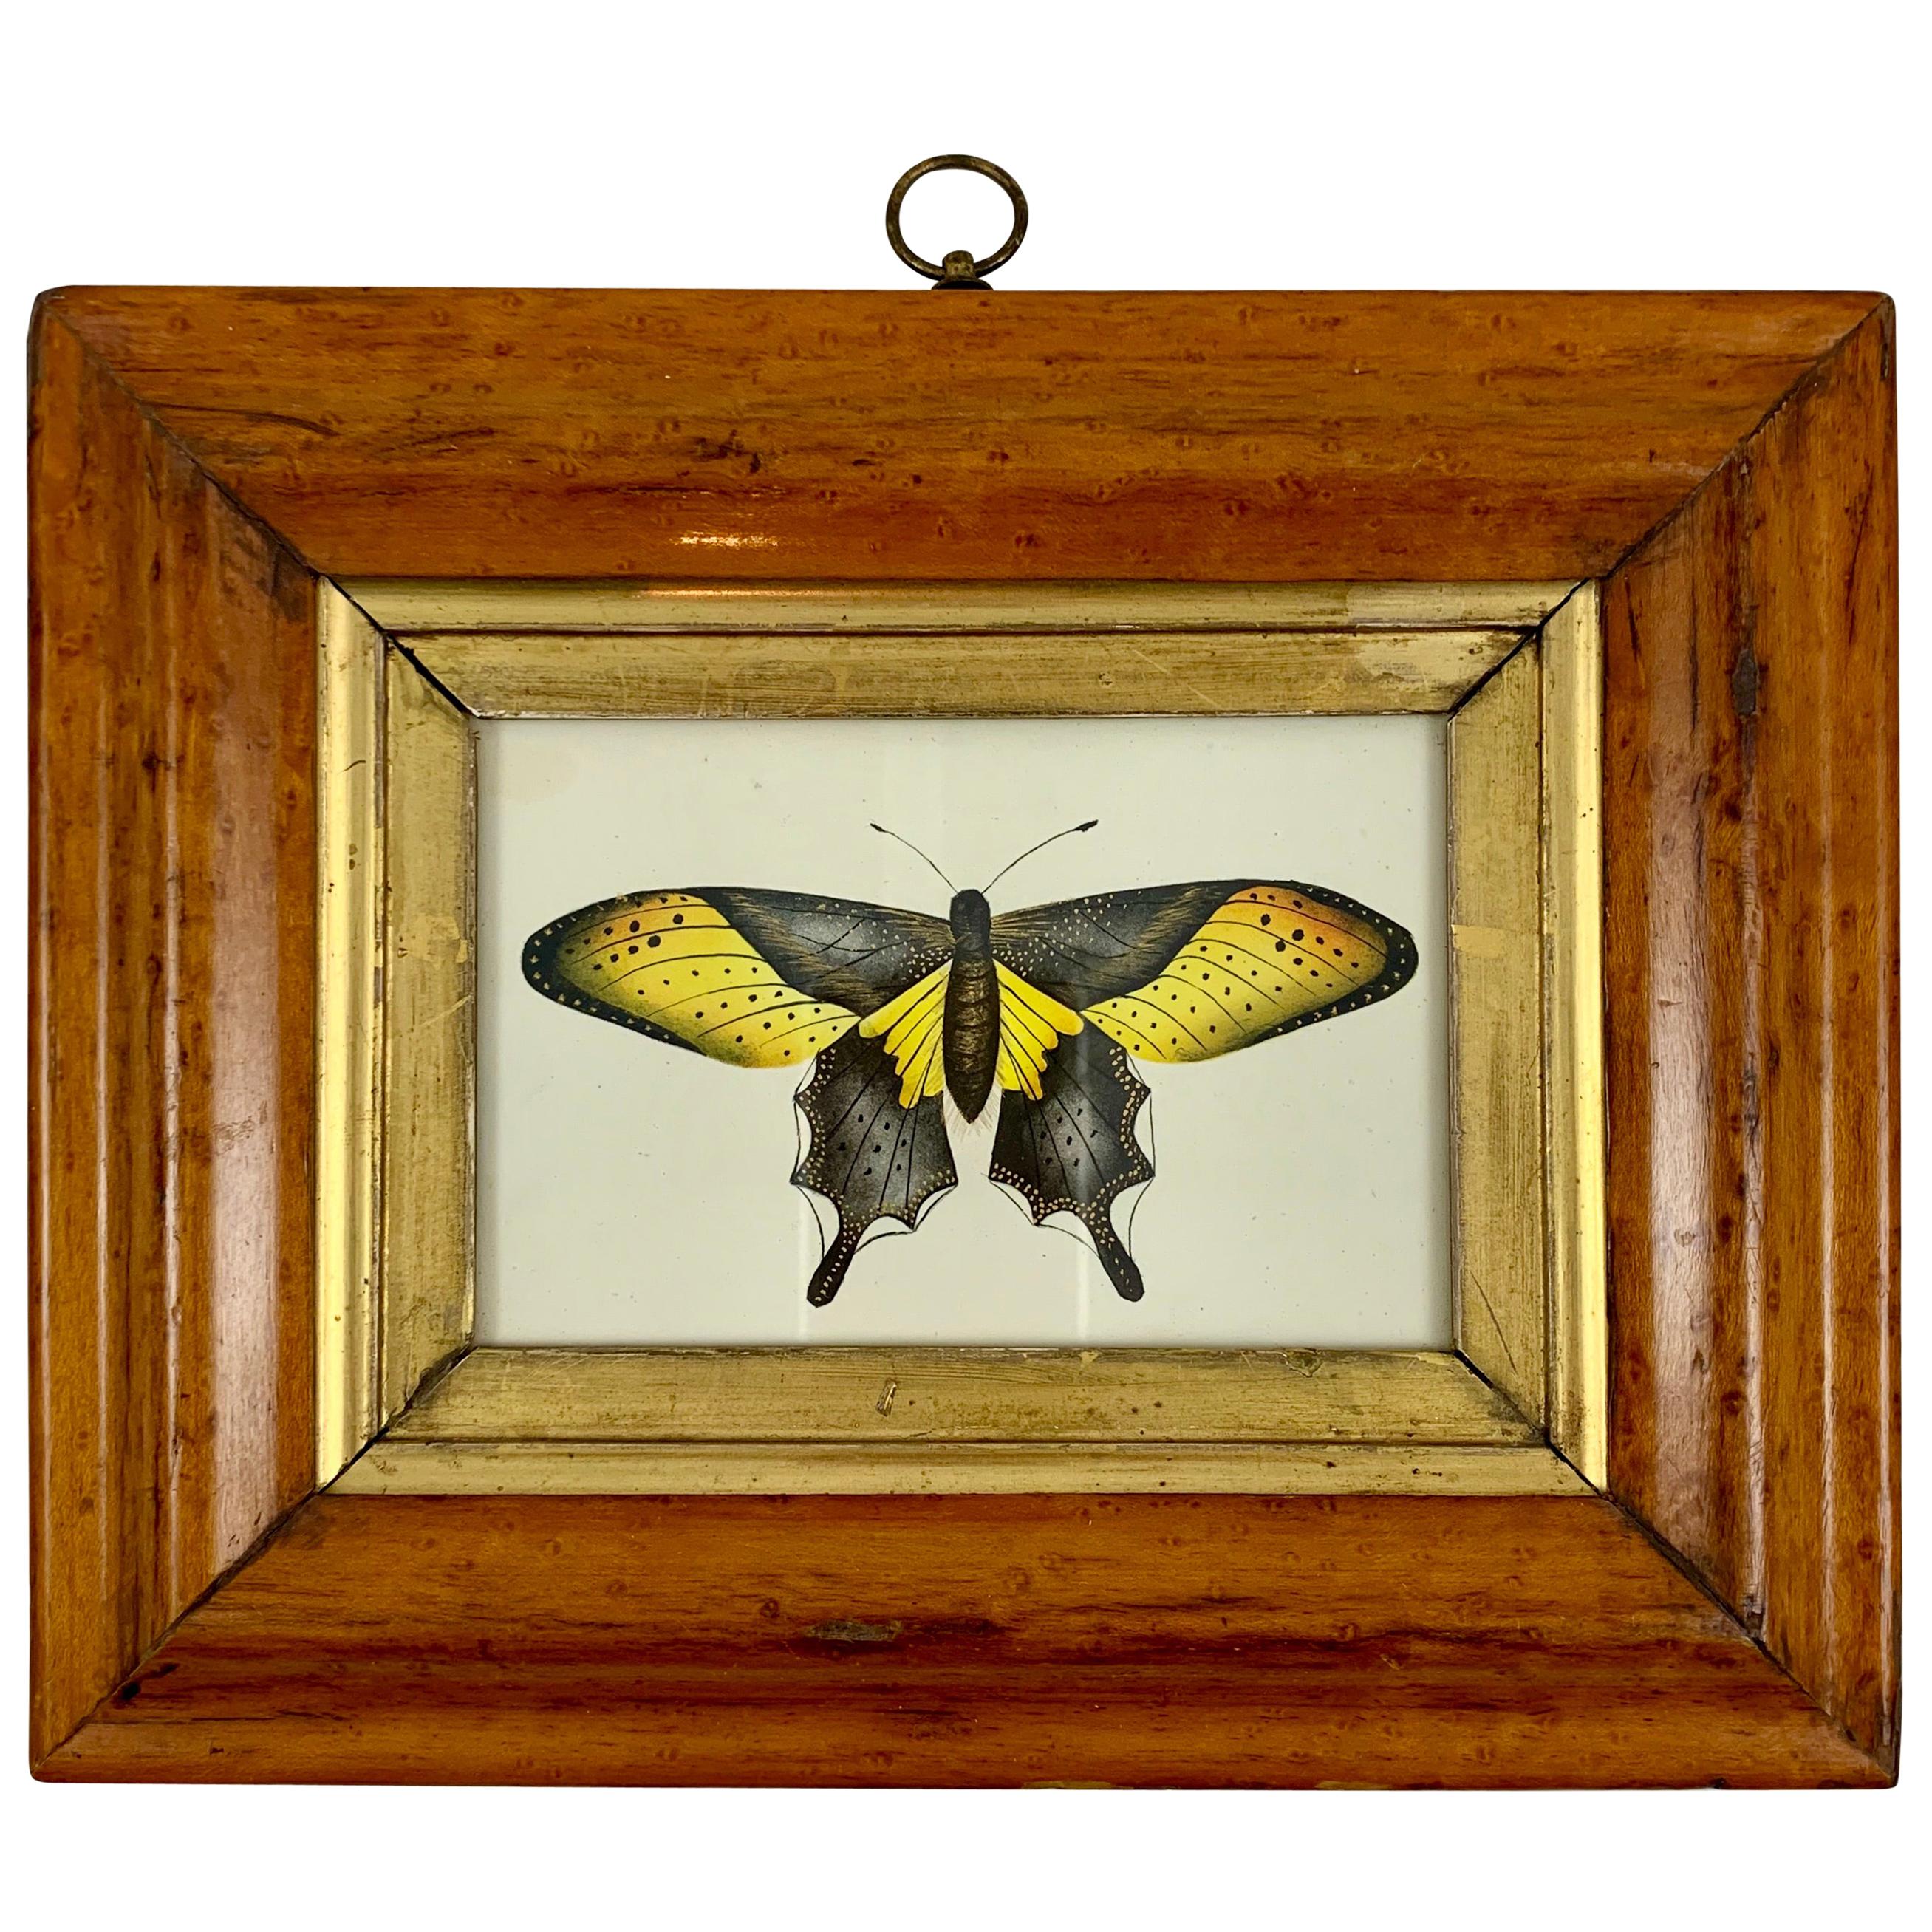 English Regency Period Original Watercolor in Fruitwood Frame, Yellow Butterfly